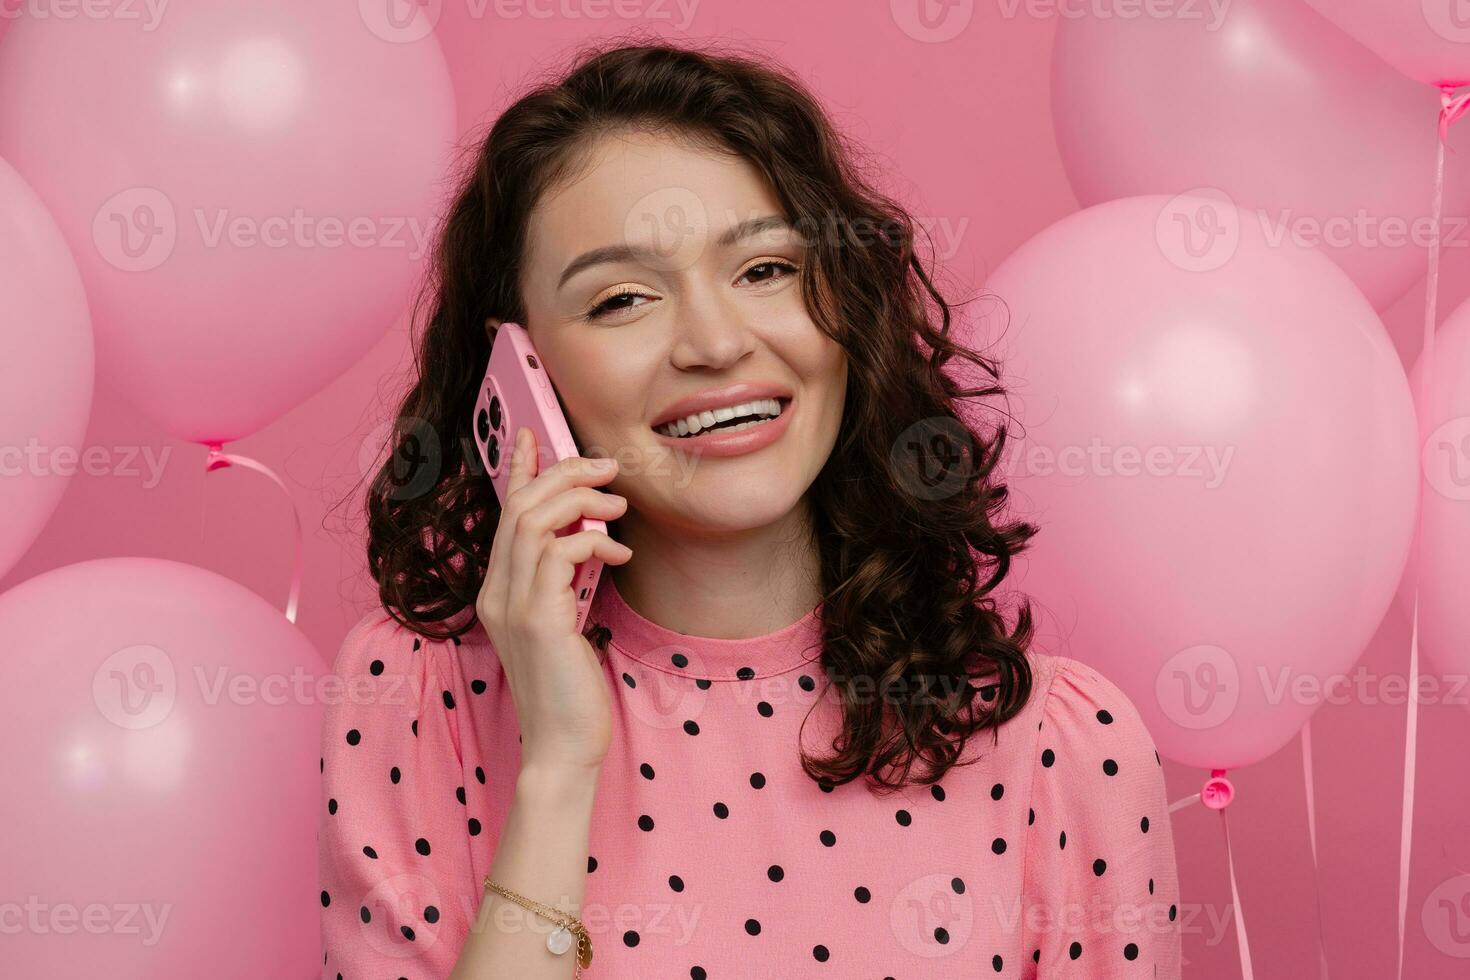 pretty young woman posing isolated on pink studio background with pink air baloons and smartphone photo